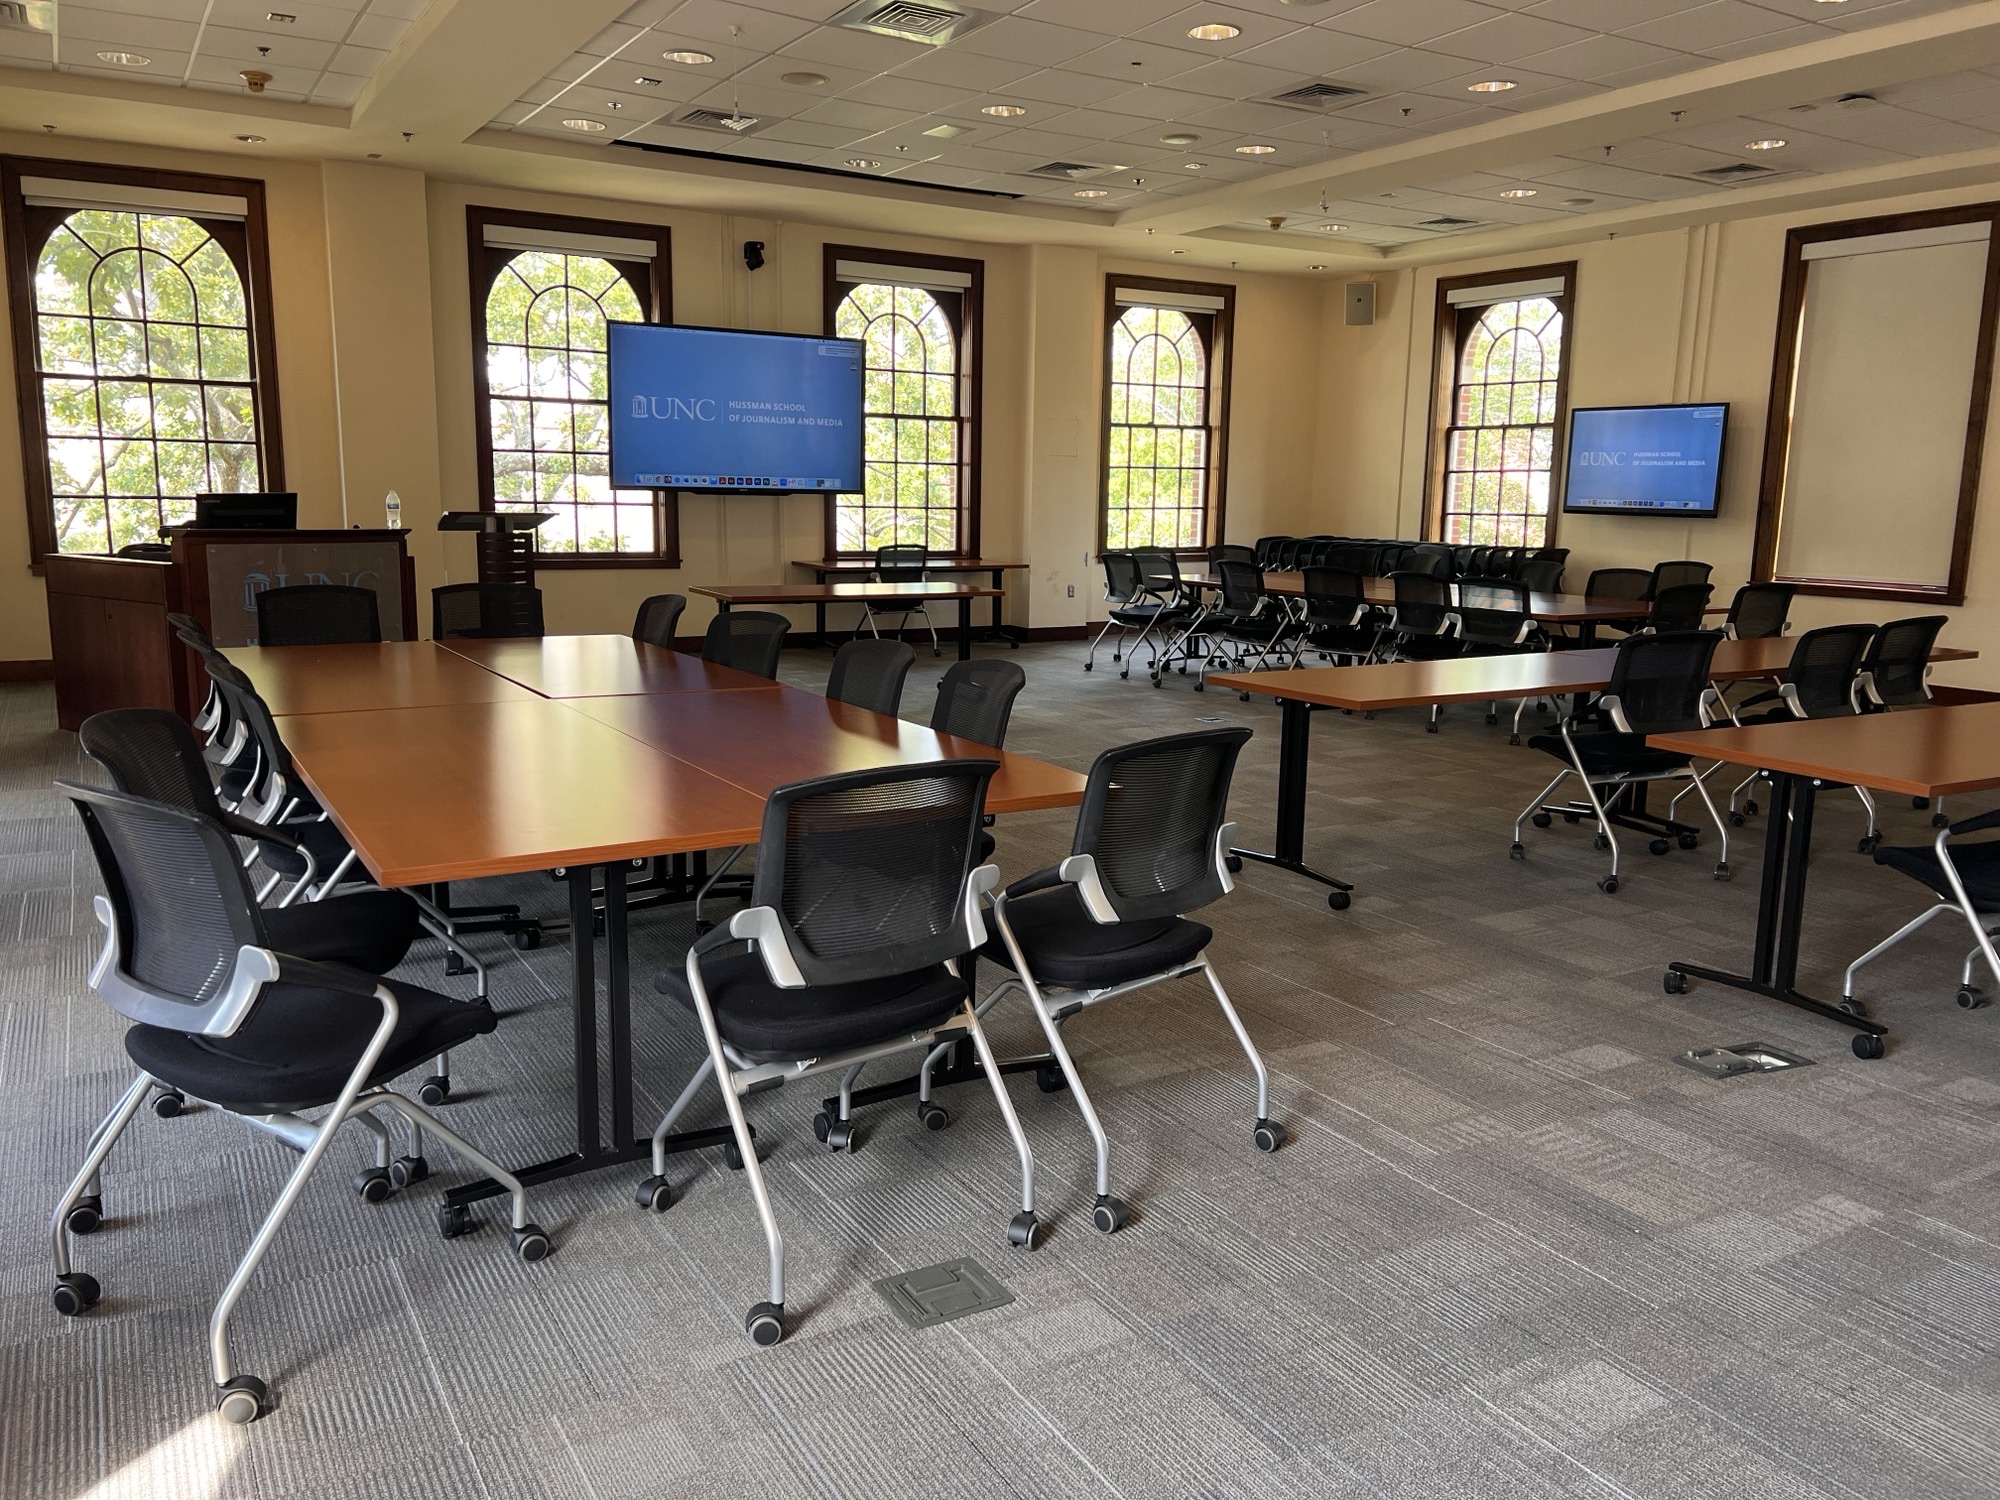 Conference room with mounted monitors and several groupings of tables surrounded by rolling chairs.